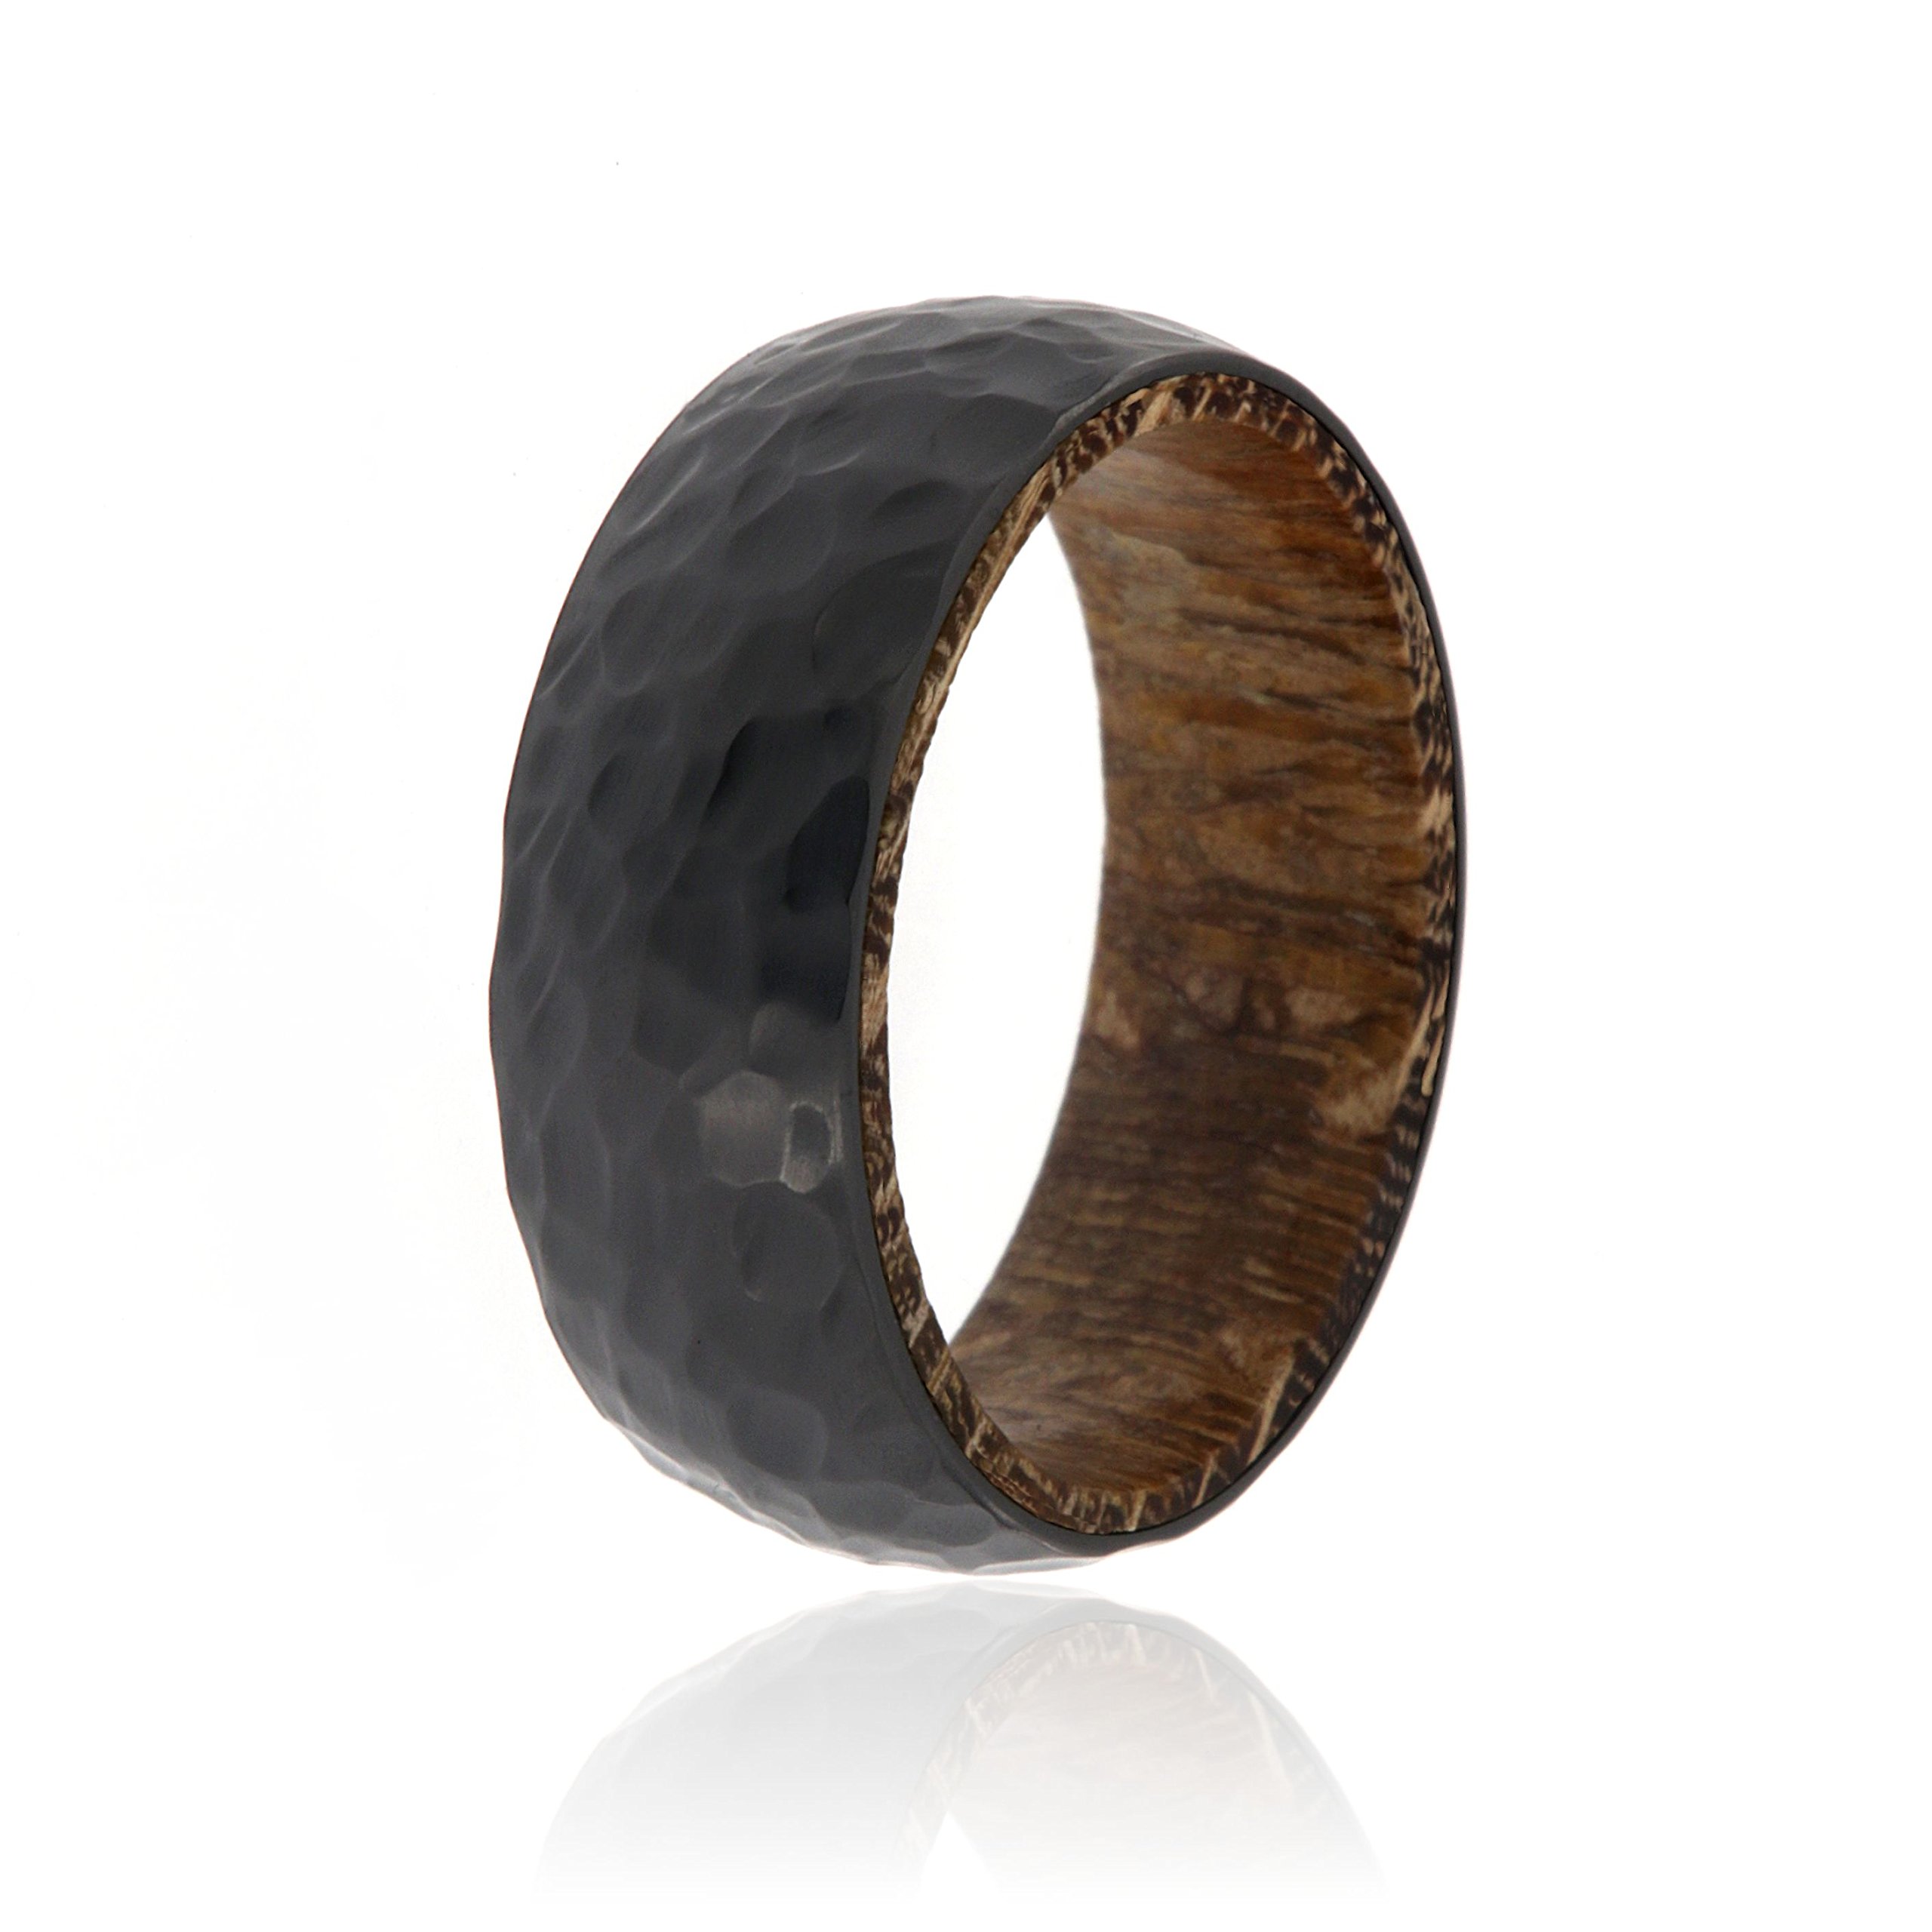 Black Zirconium Ring With Leopard Wood Sleeve And Premium Hammered Finish 8mm Wide Ring - USA Made Custom Jewelry And Bands